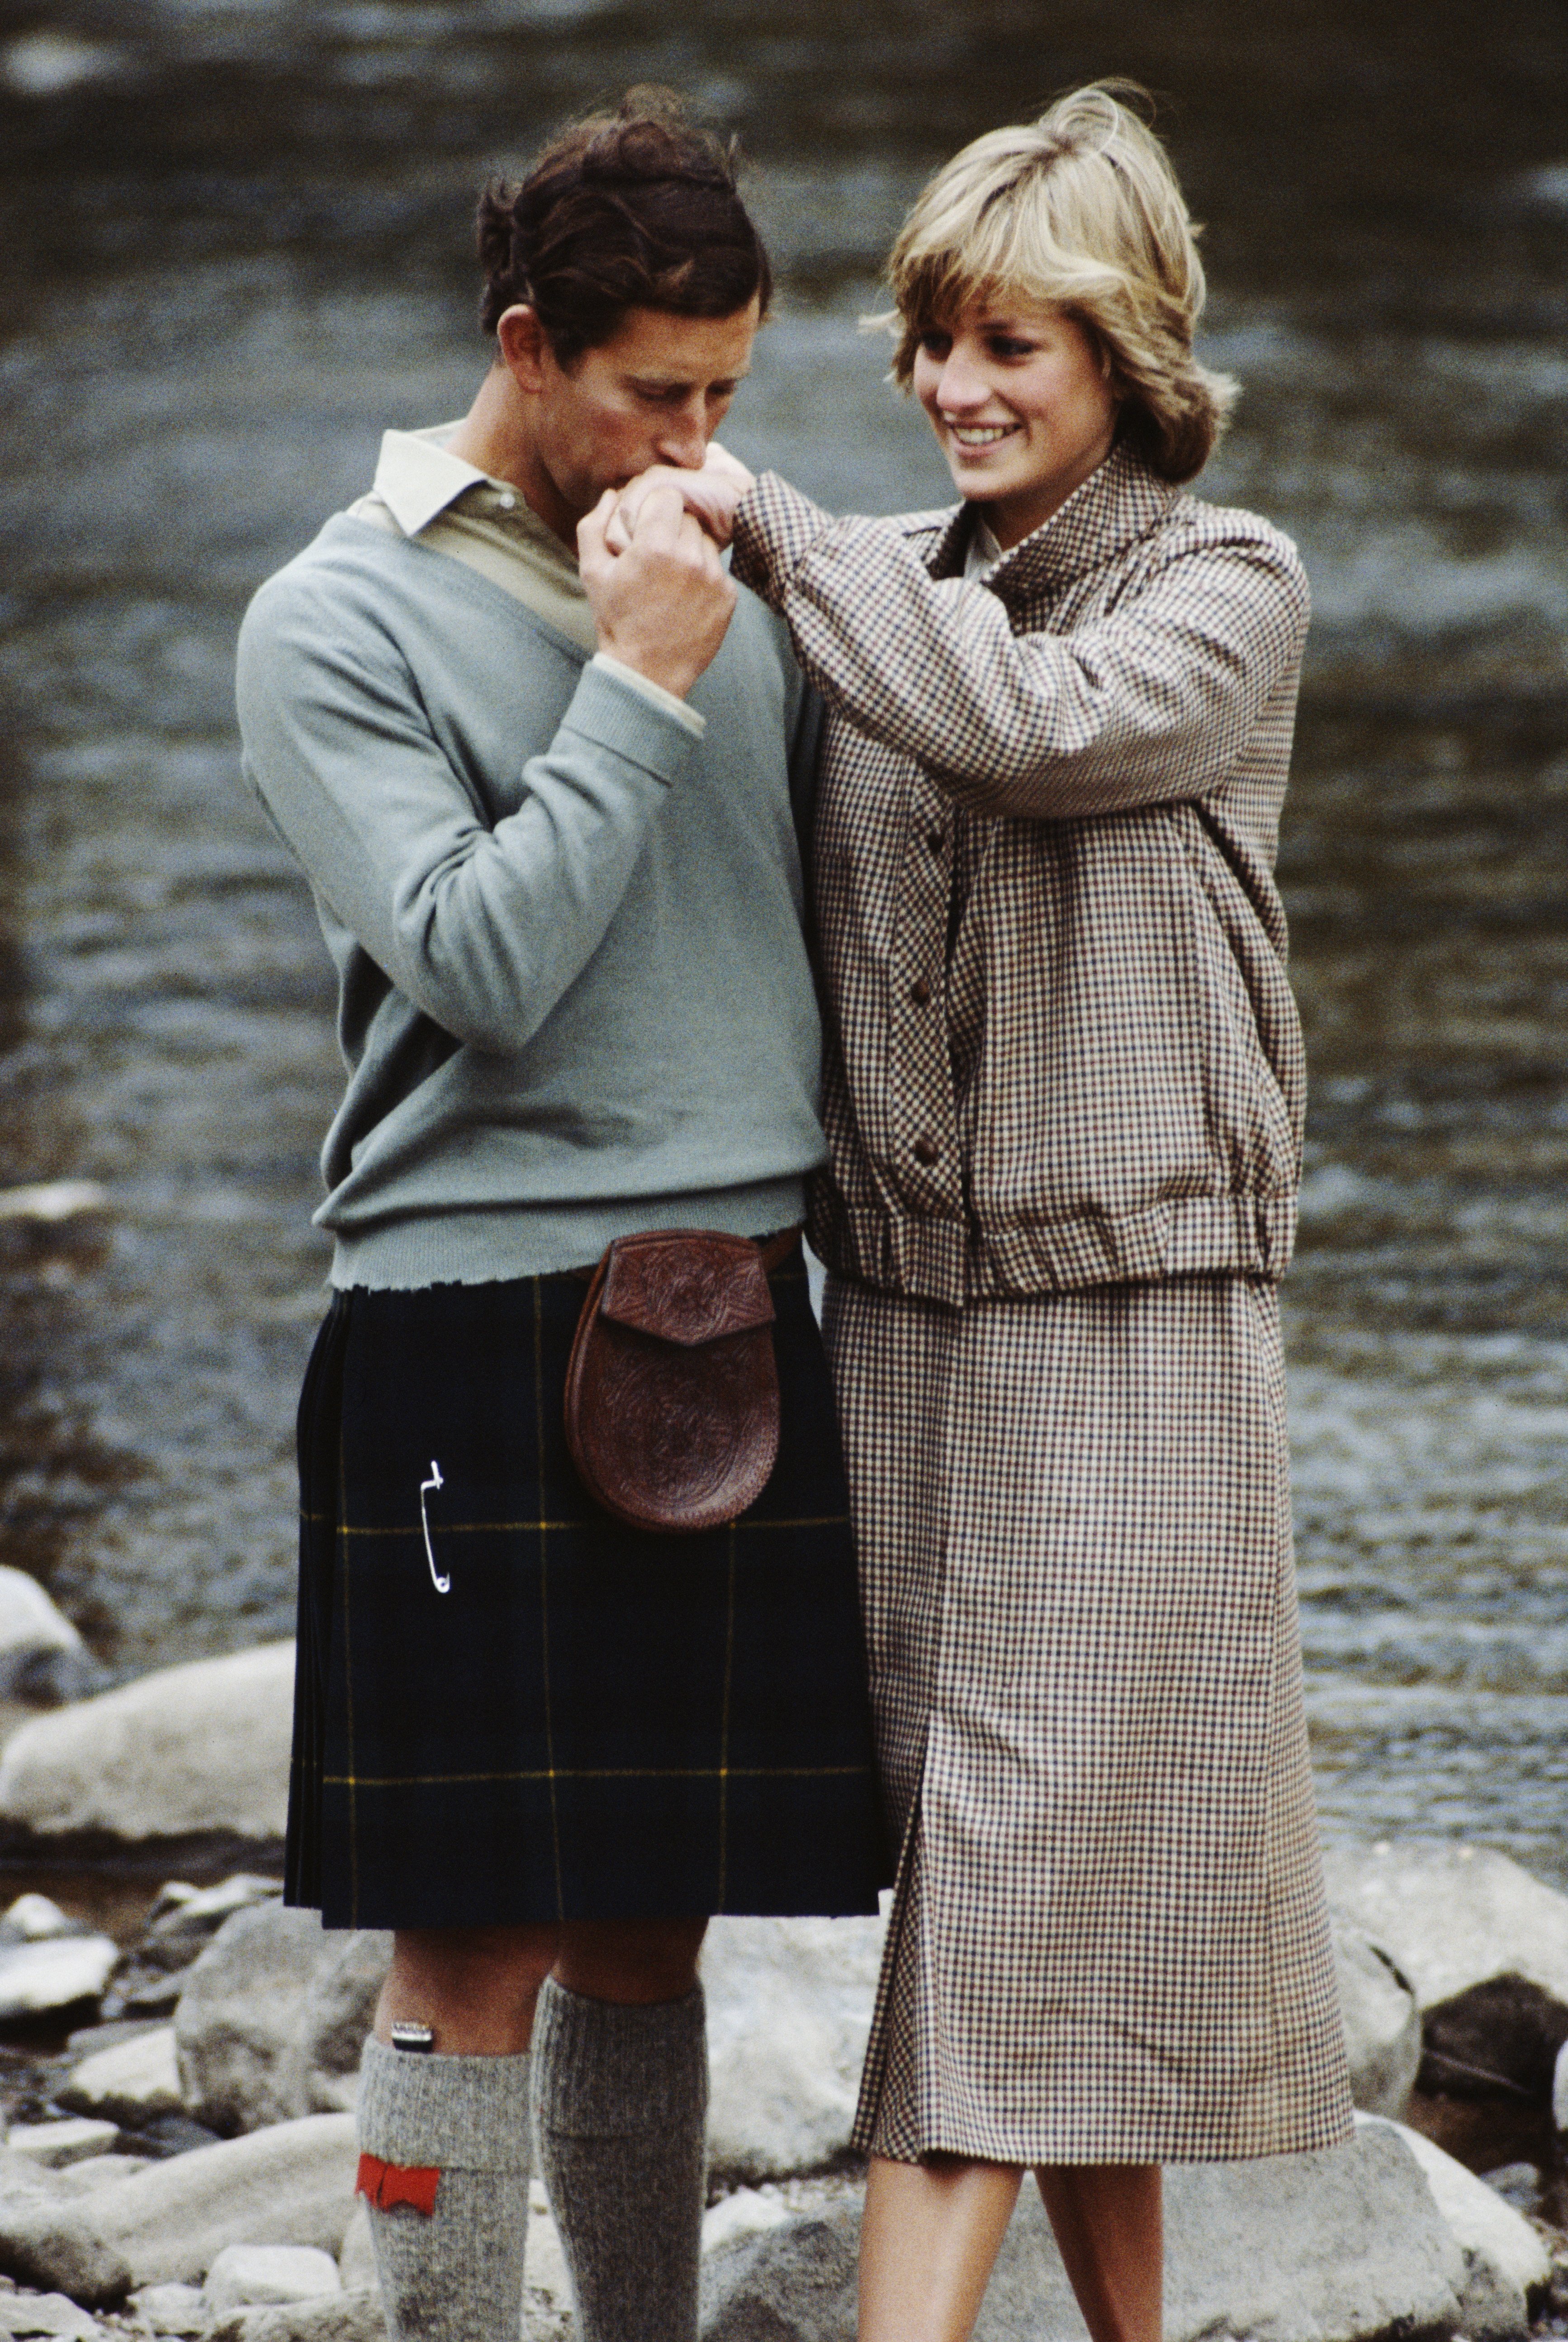 Prince Charles and Diana, Princess of Wales pose together during their honeymoon in Balmoral, Scotland, 19th August 1981 | Source: Getty Images